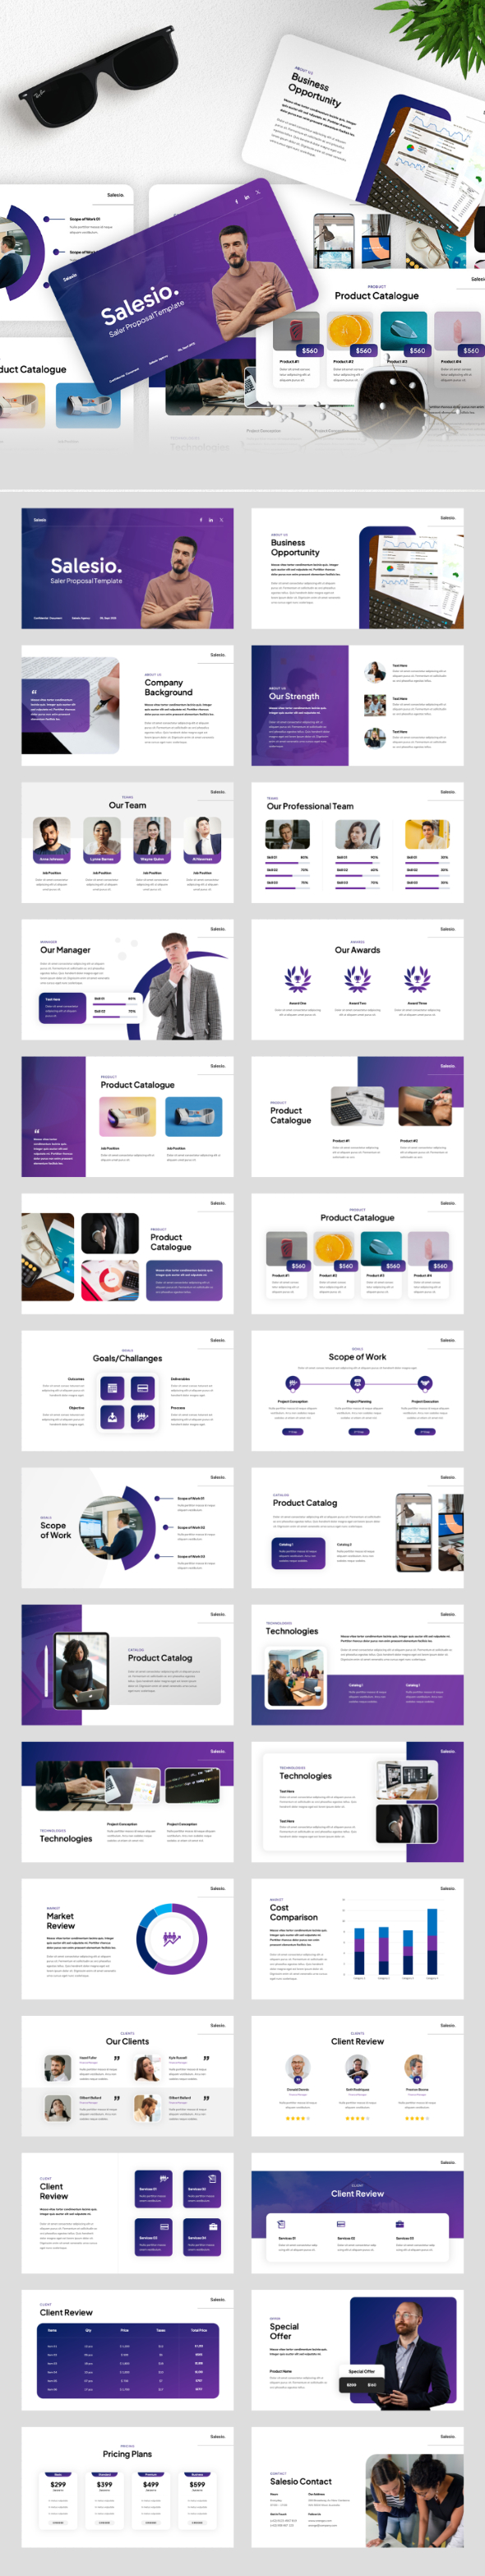 [DOWNLOAD]Salesio.  - Sales Proposal PowerPoint Tamplate